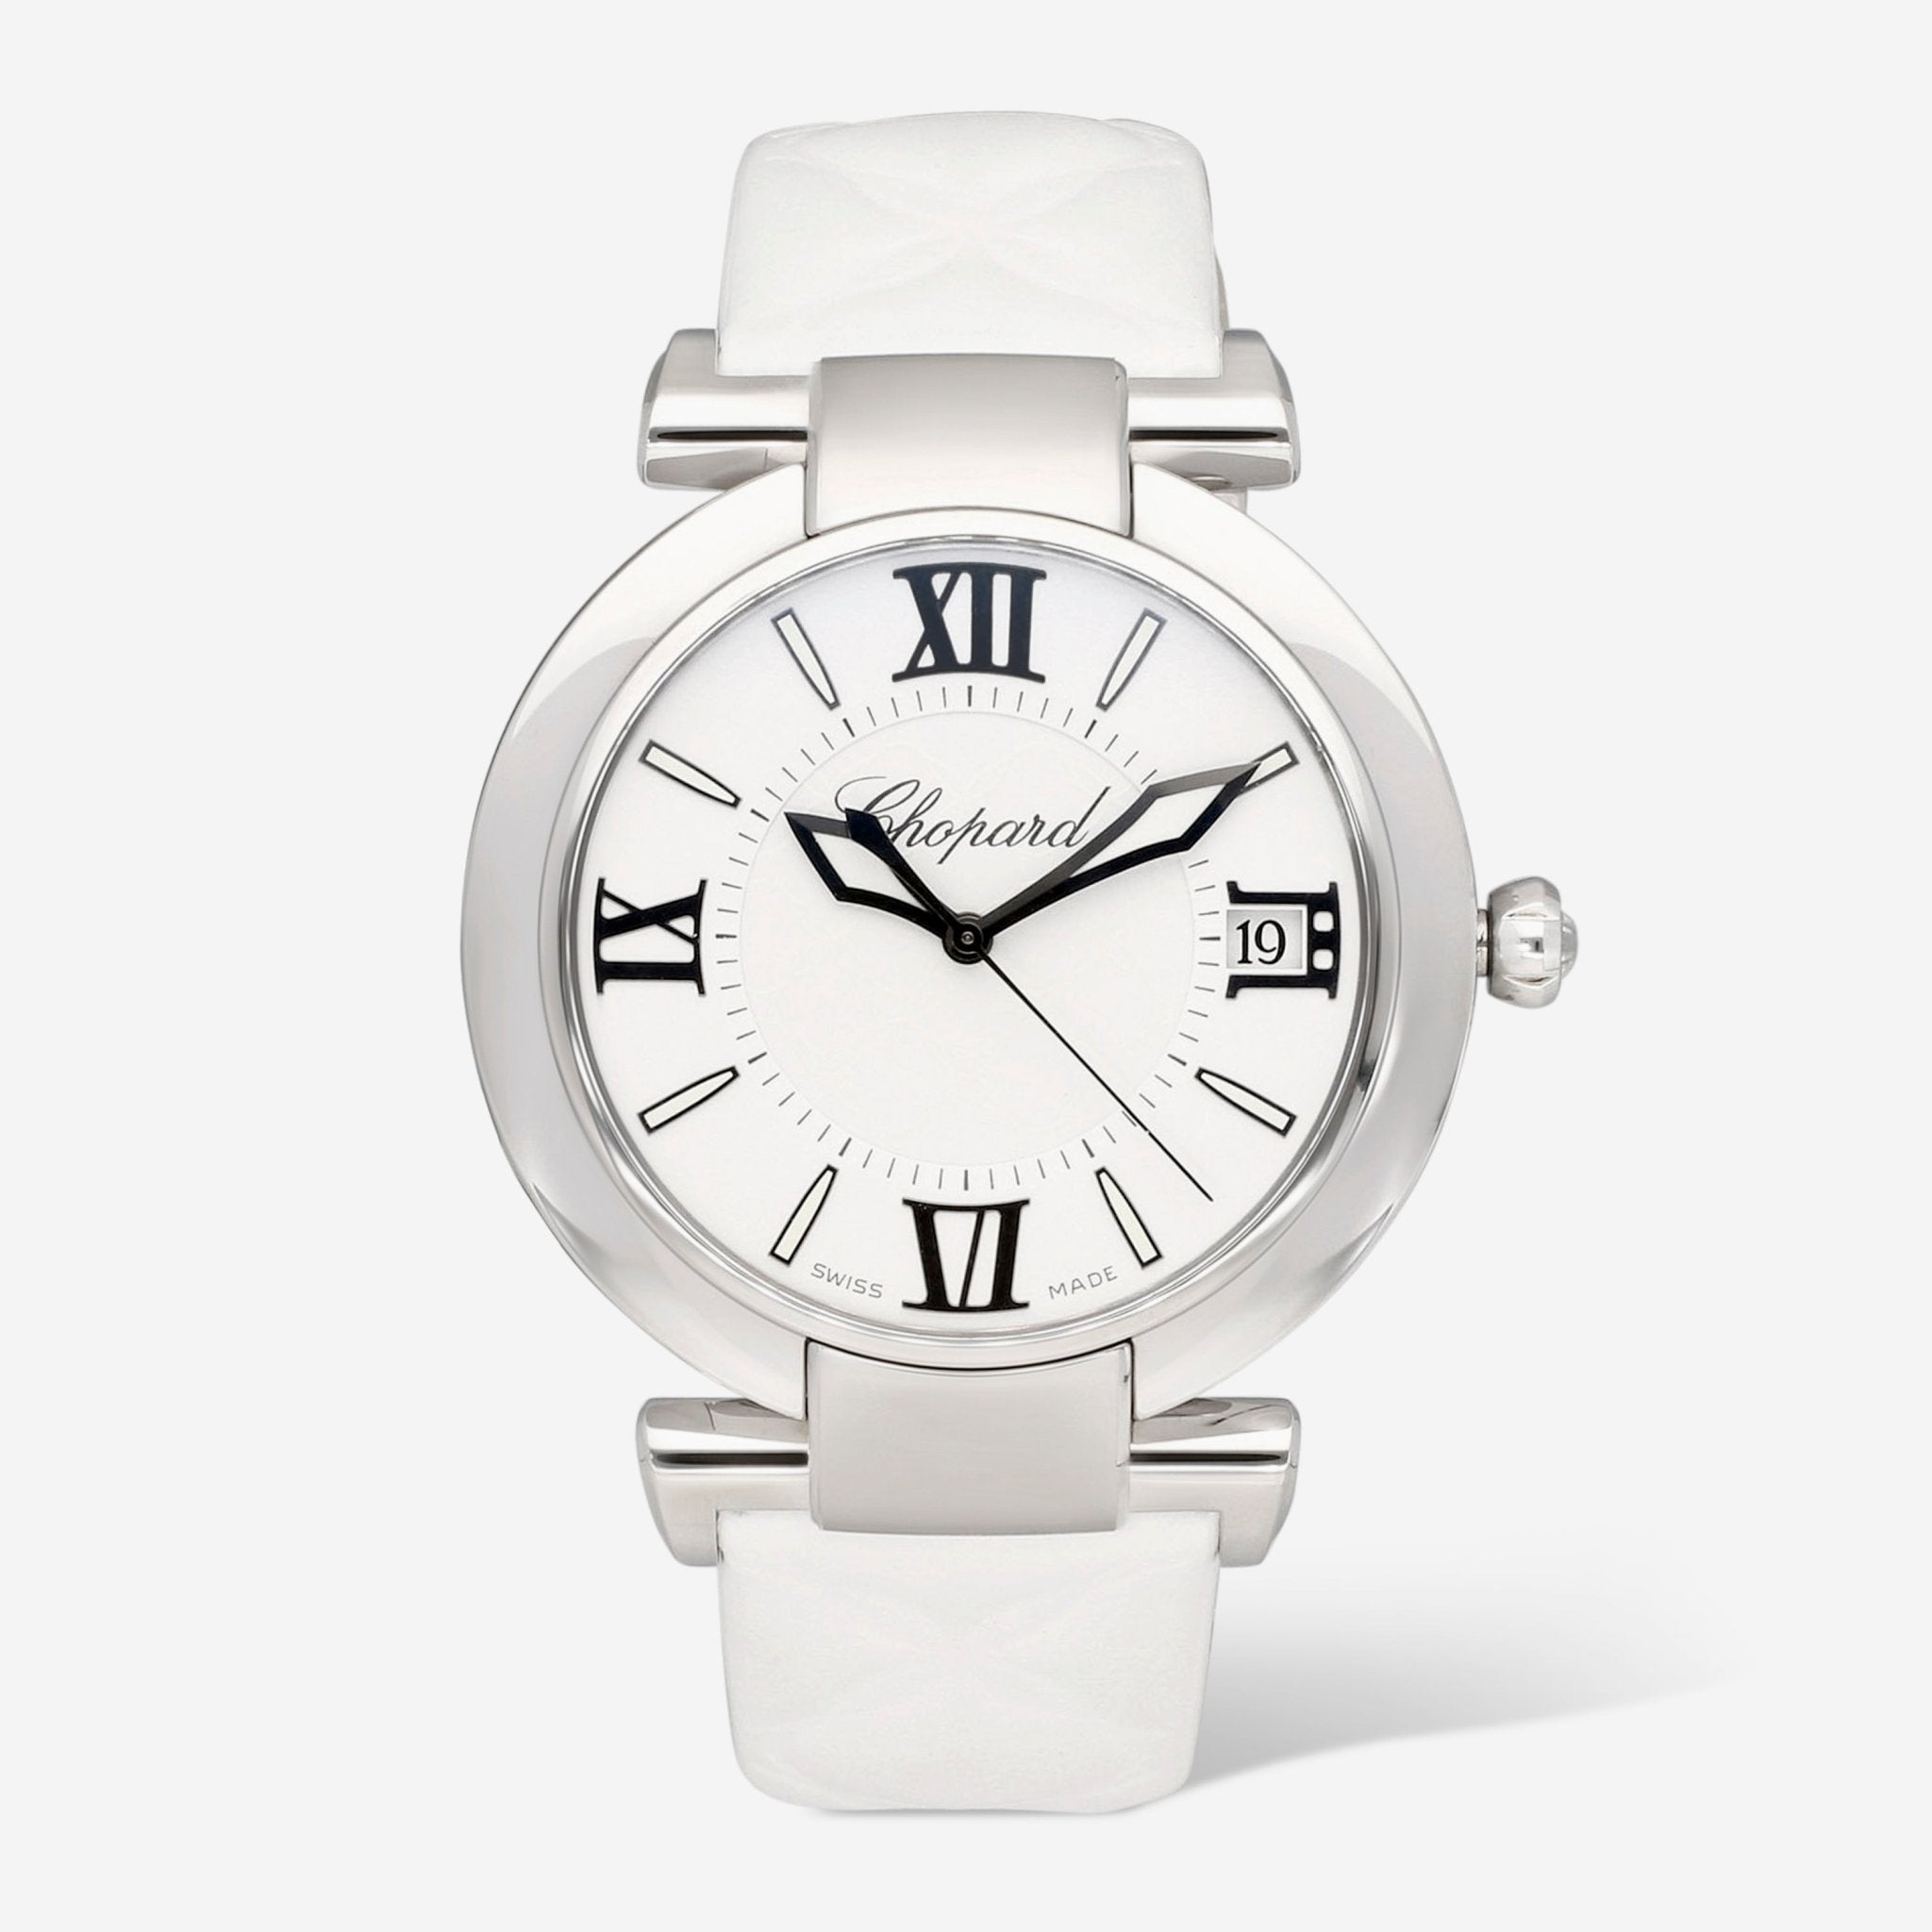 Chopard Imperiale White Dial Stainless Steel Automatic Ladies Watch 388531 - 3007 - THE SOLIST - Chopard